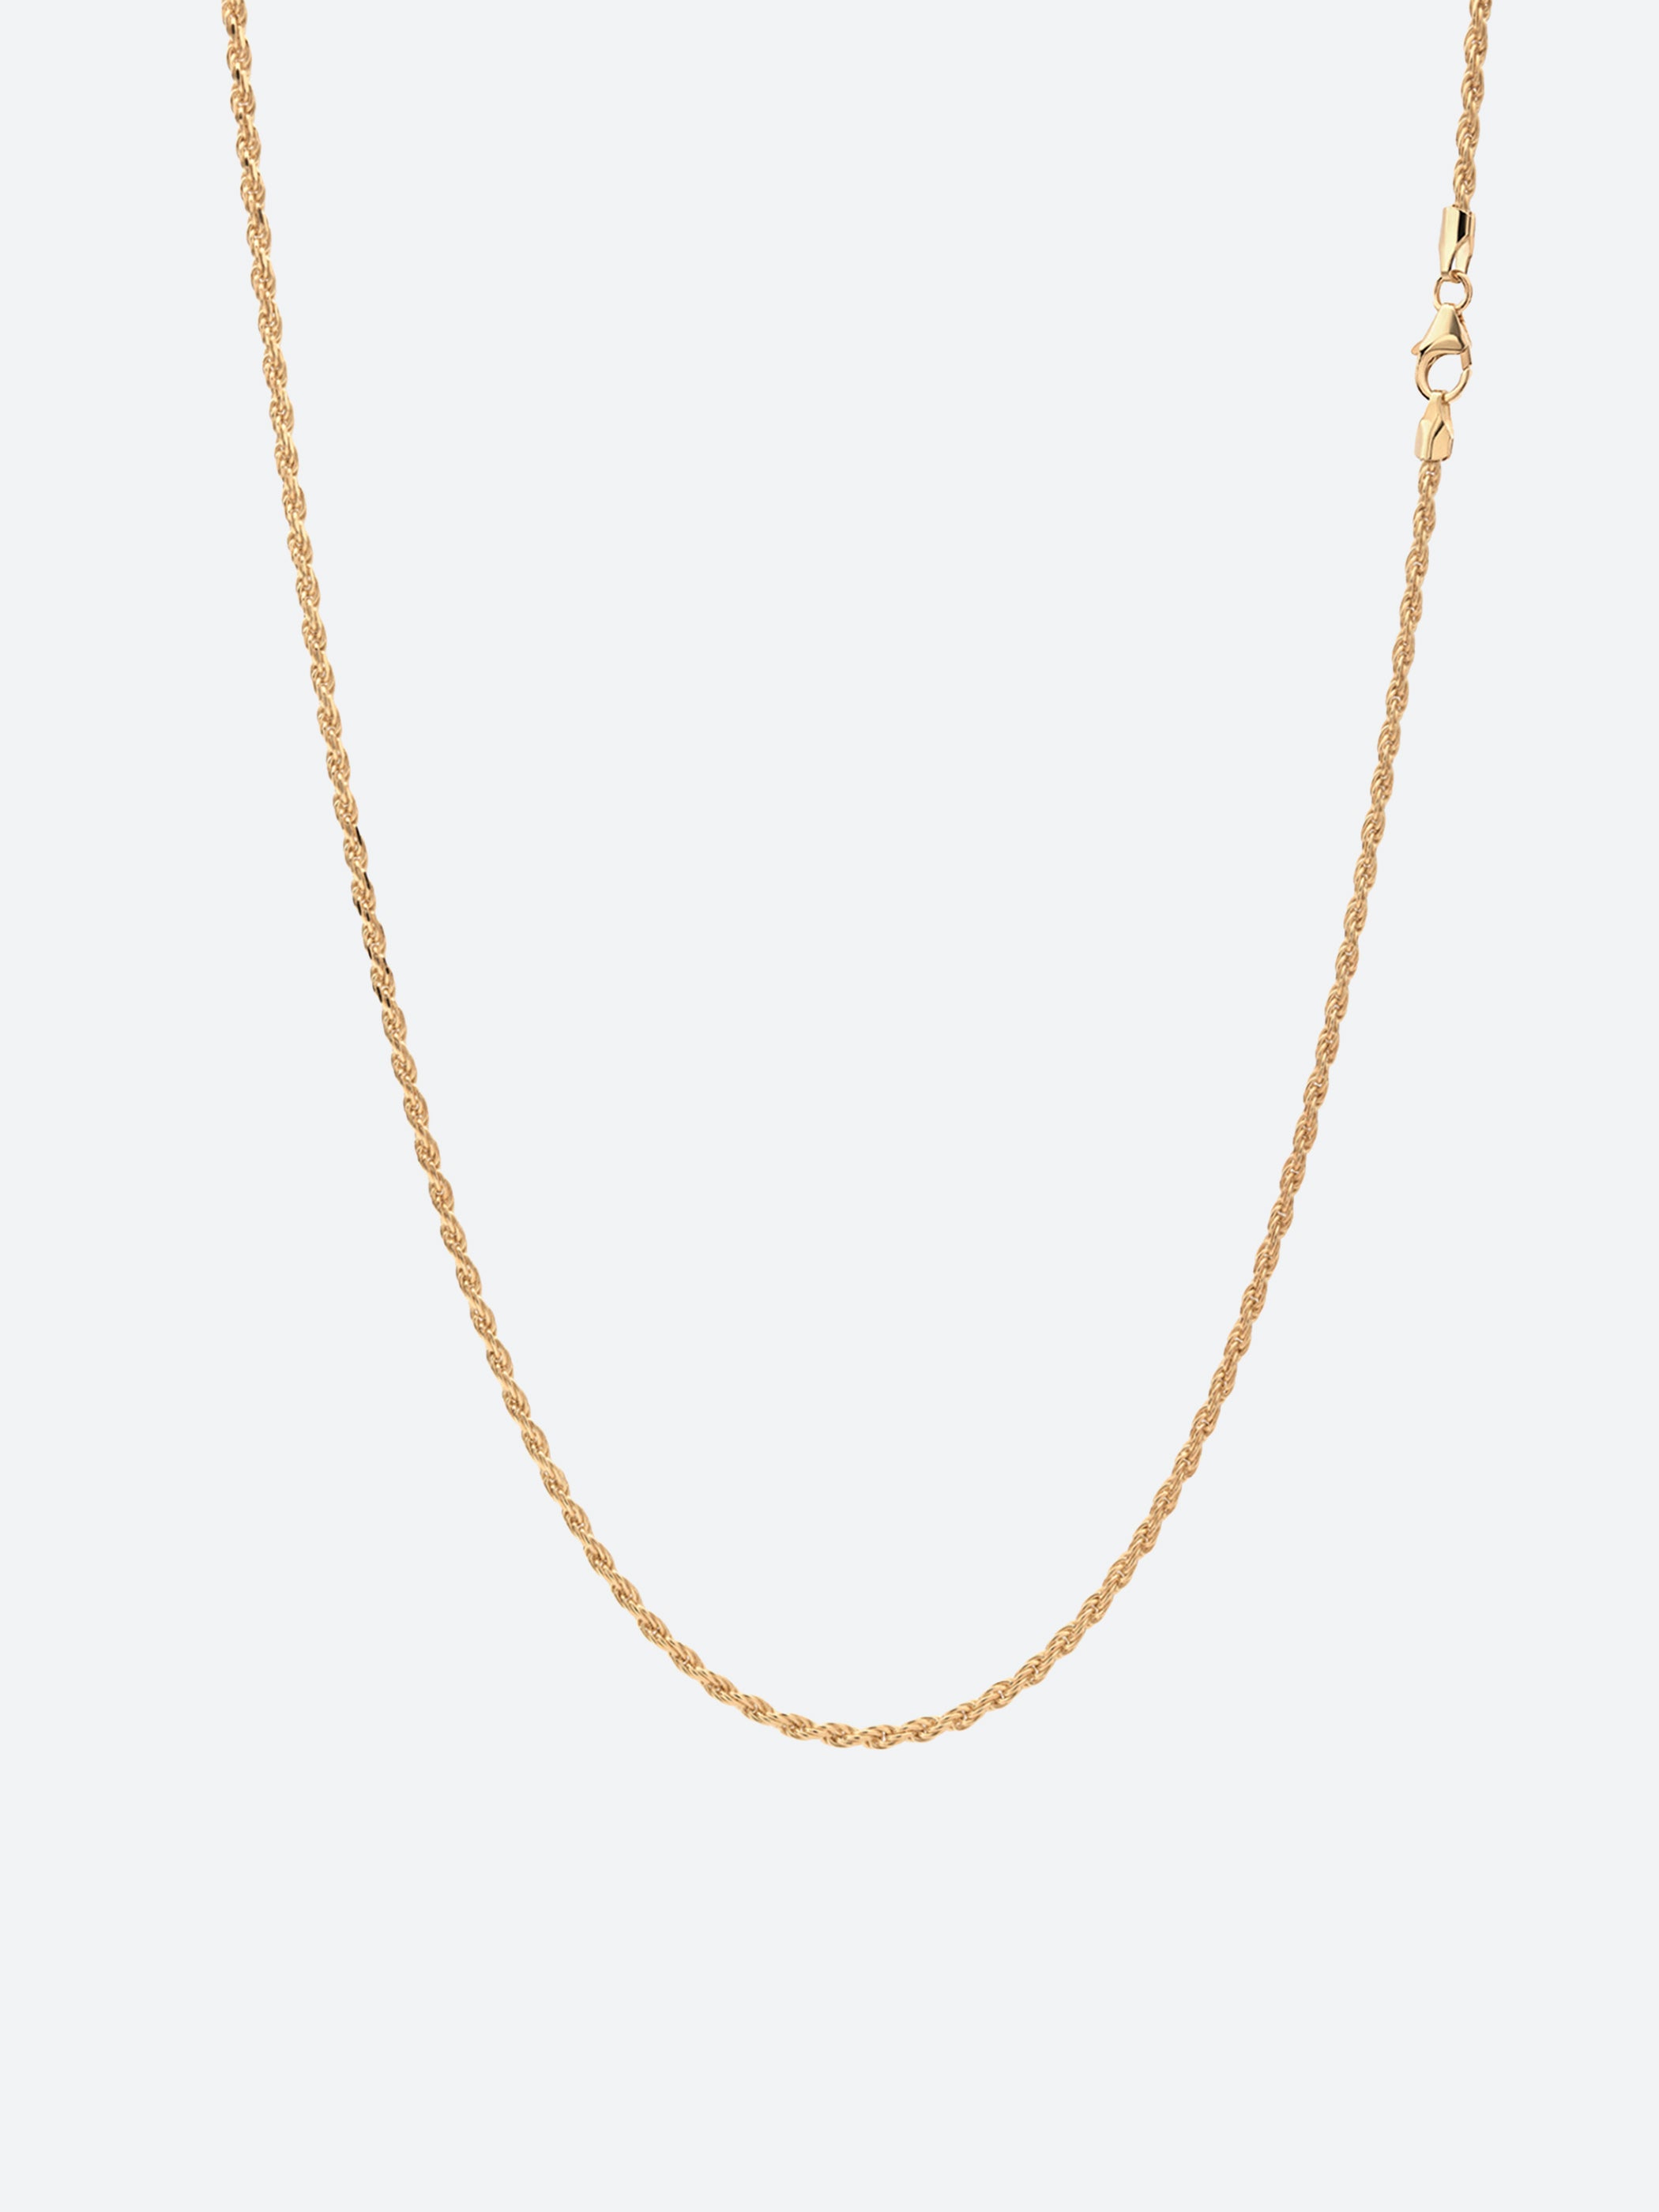 1.8mm Rope Chain